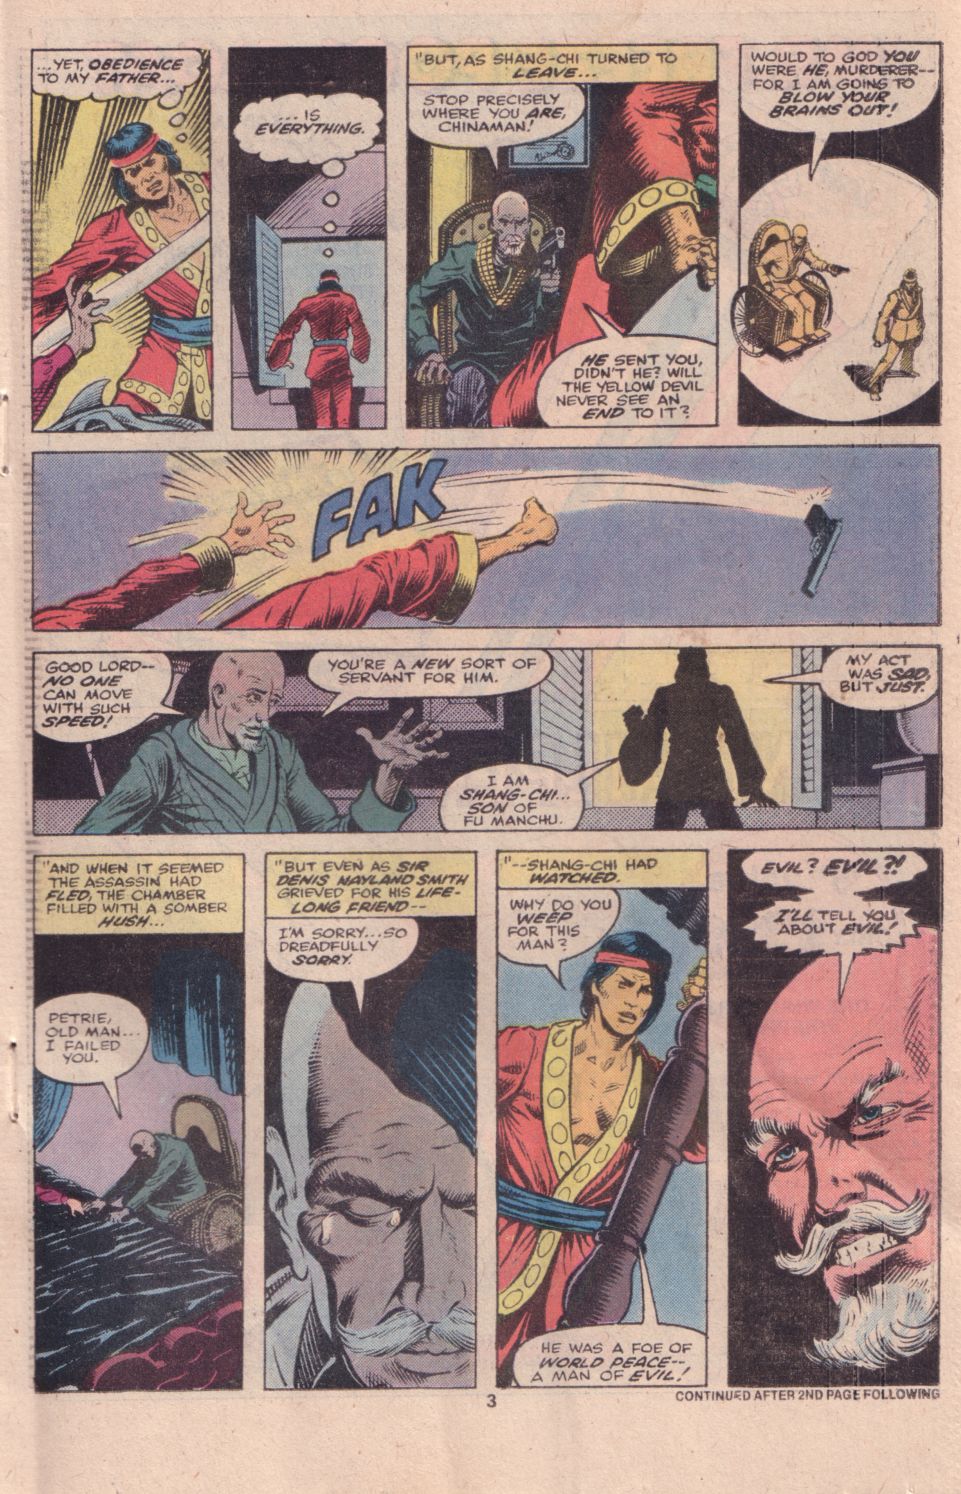 What If? (1977) issue 16 - Shang Chi Master of Kung Fu fought on The side of Fu Manchu - Page 4